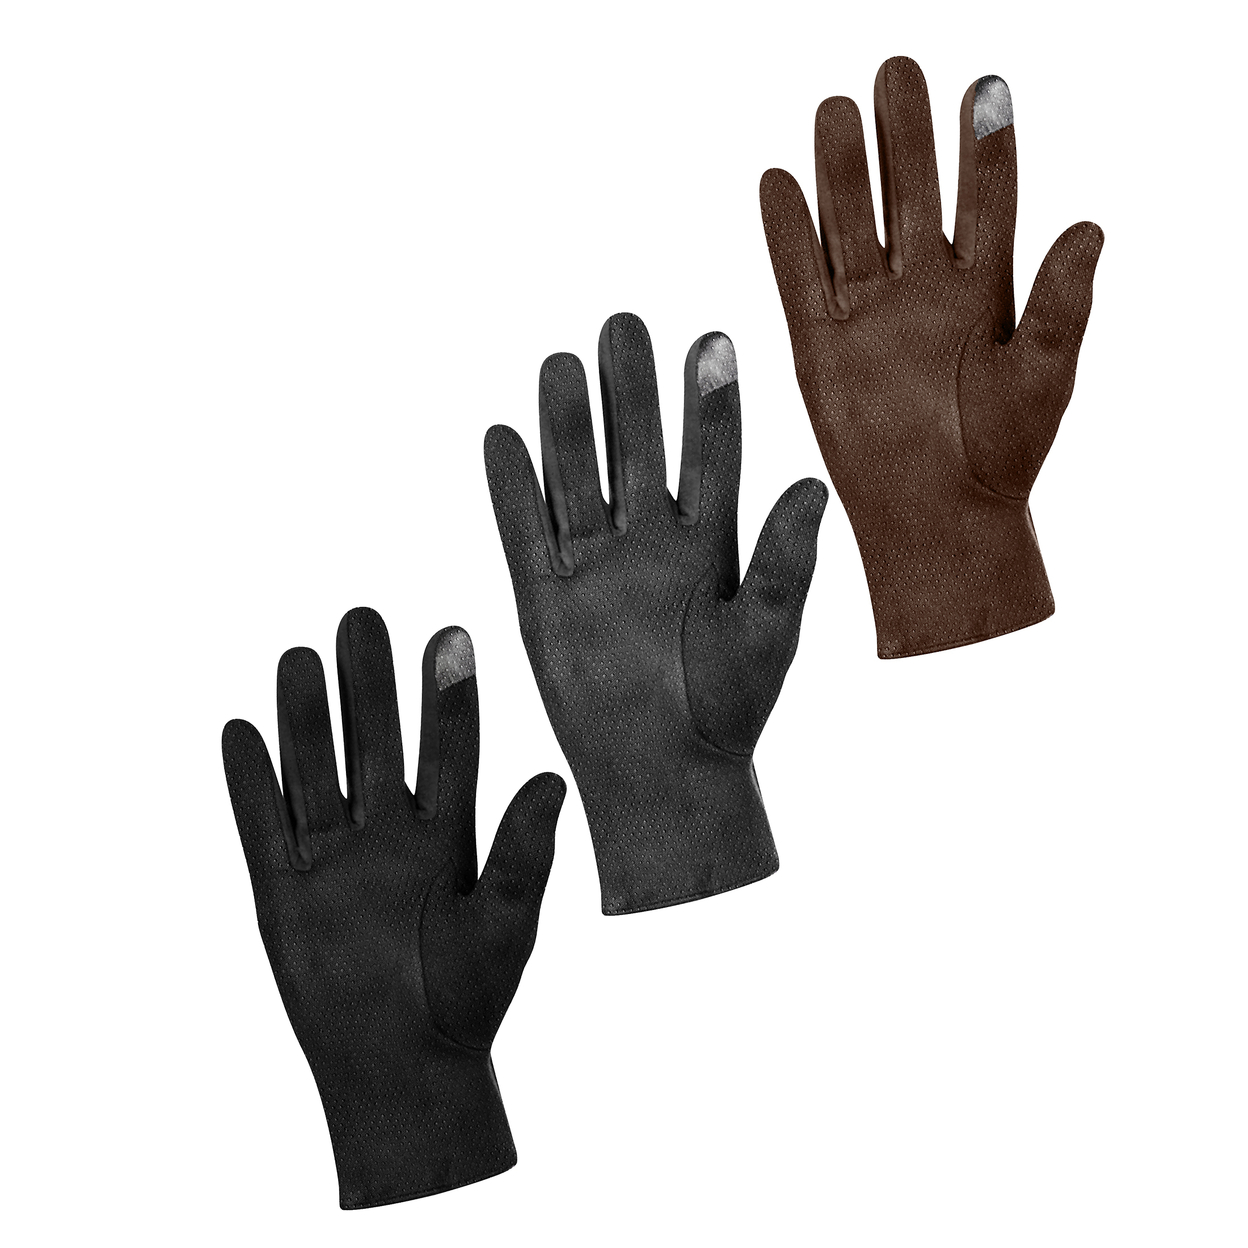 2-Pairs: Winter Warm Soft Lining Weather-Proof Touchscreen Suede Insulated Gloves - Black & Grey